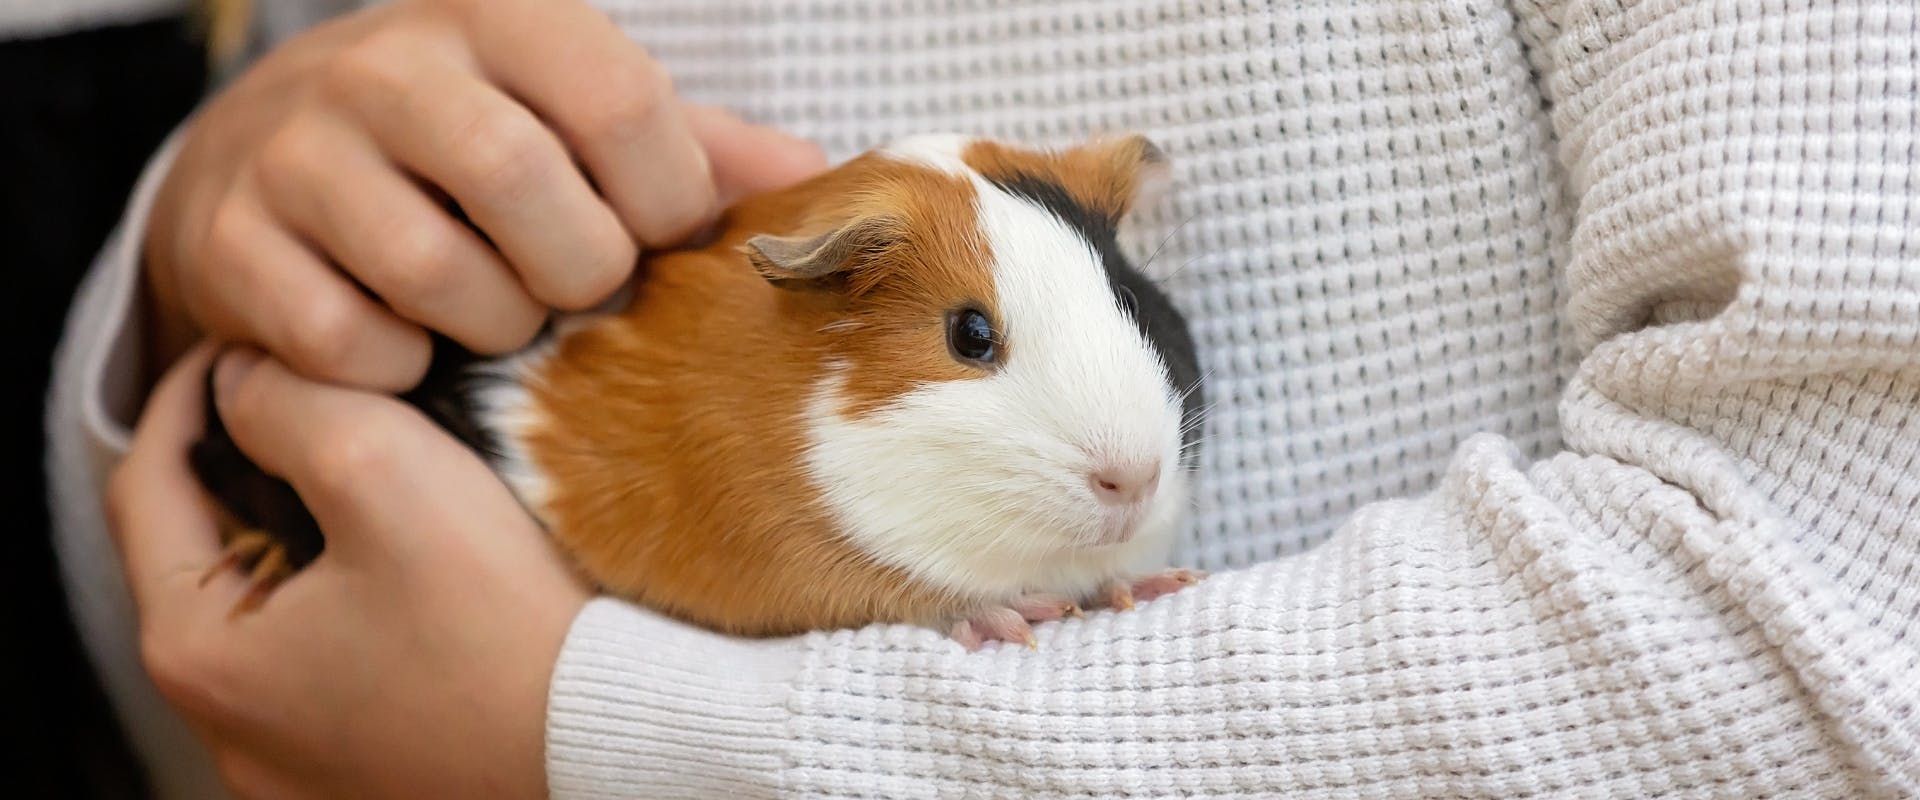 A guinea pig being held.